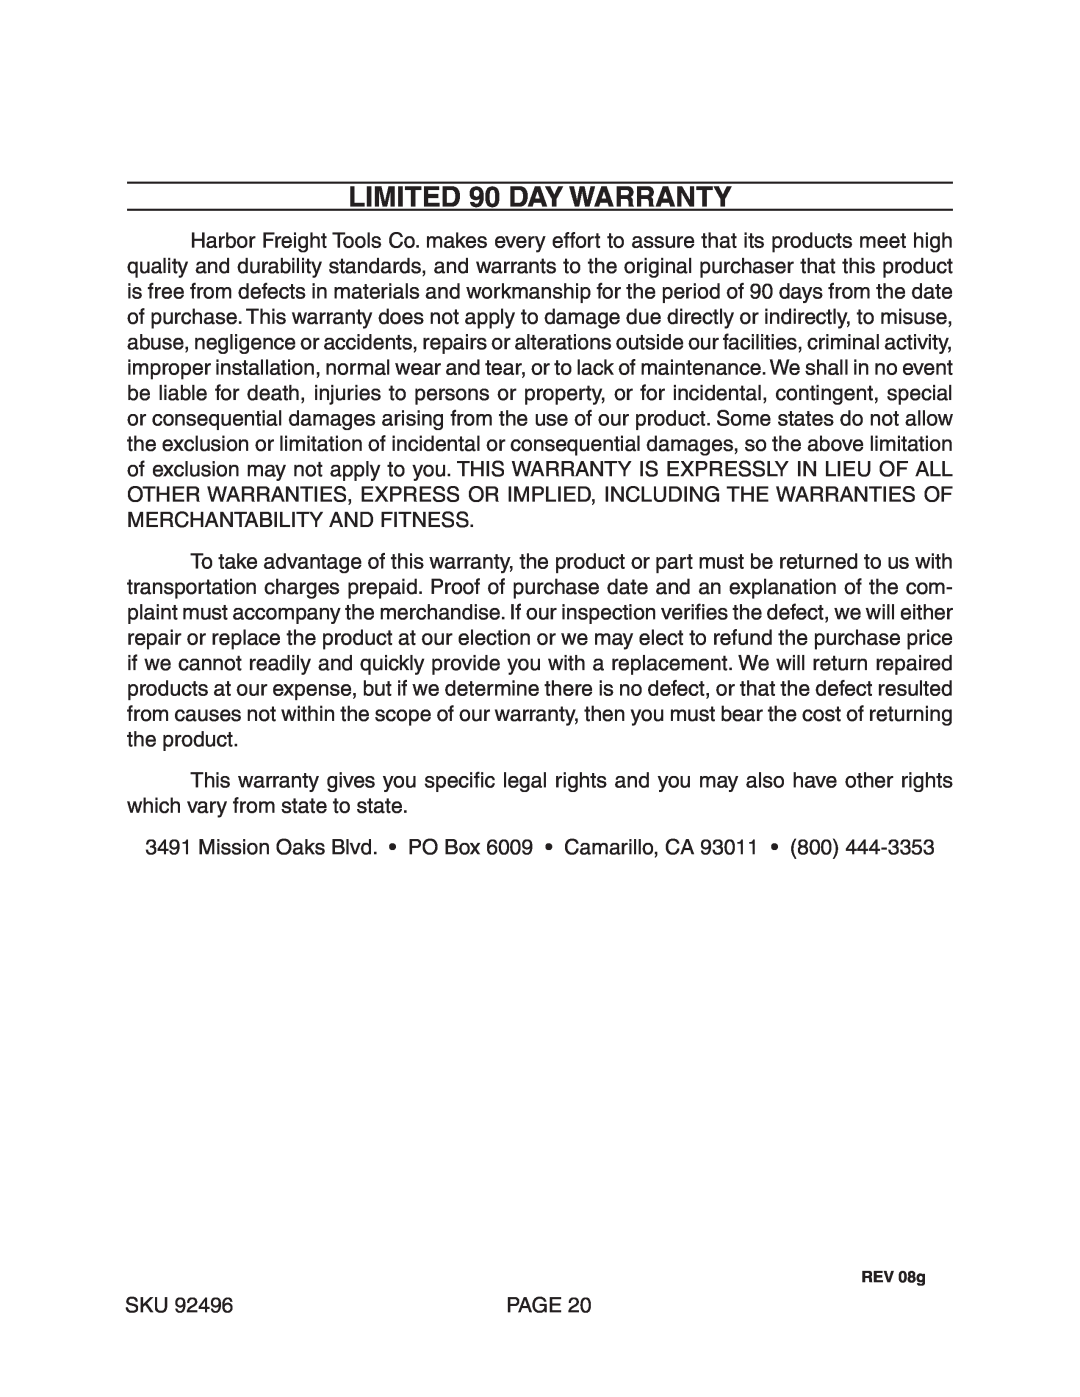 Chicago Electric 92496 operating instructions LIMITED 90 DAY WARRANTY 